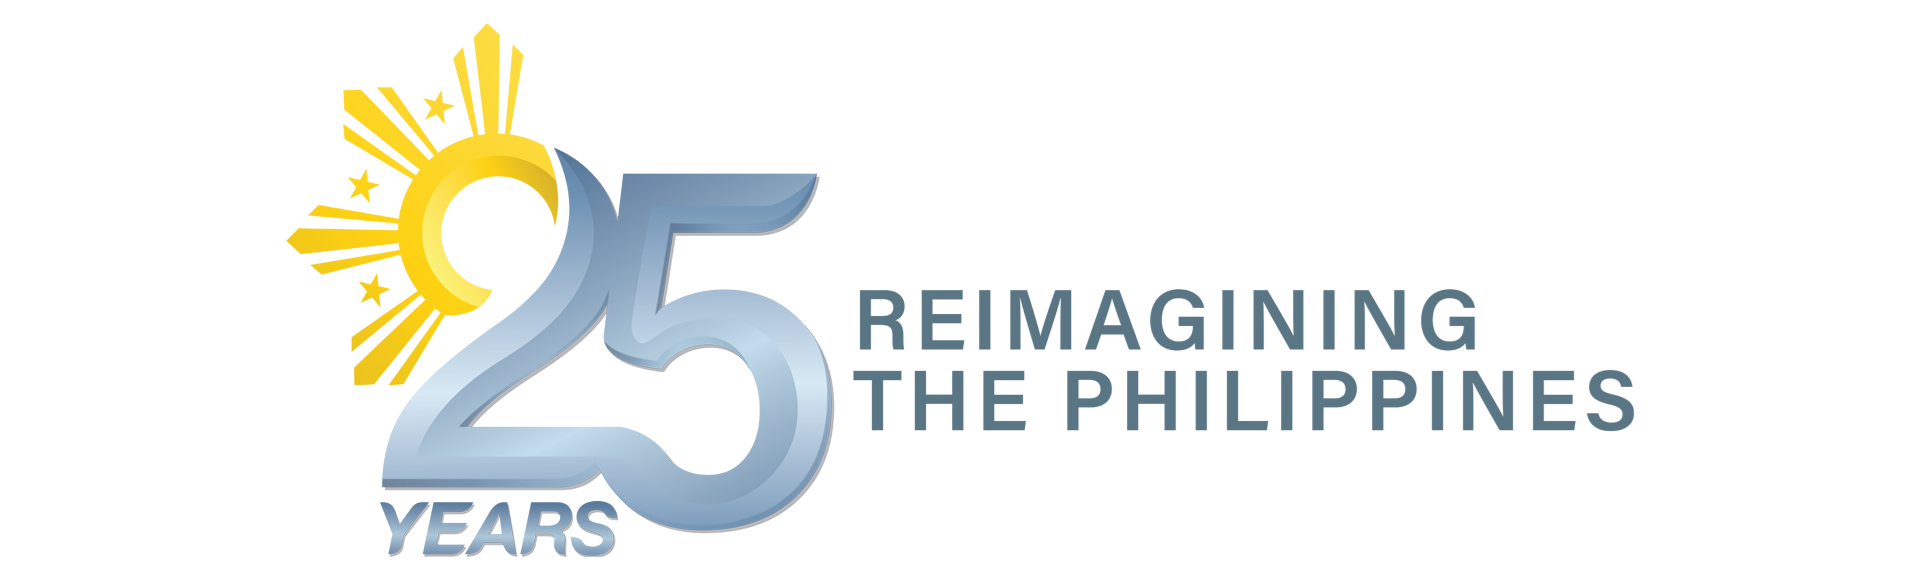 25 years of Teleperformance in the Philippines - Reimagining our future